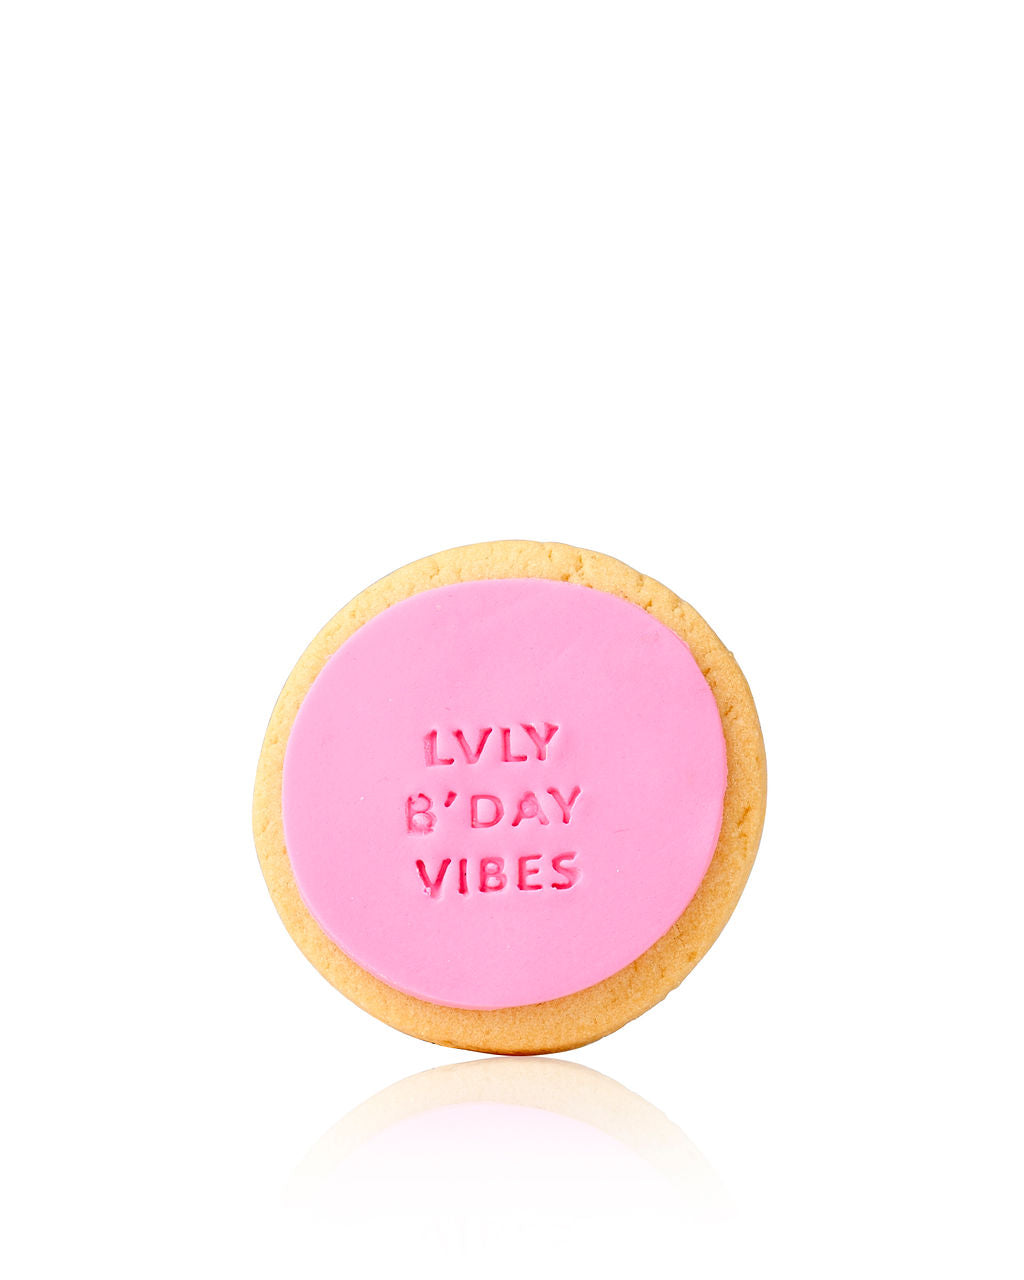 'LVLY b'day vibes' quote cookie